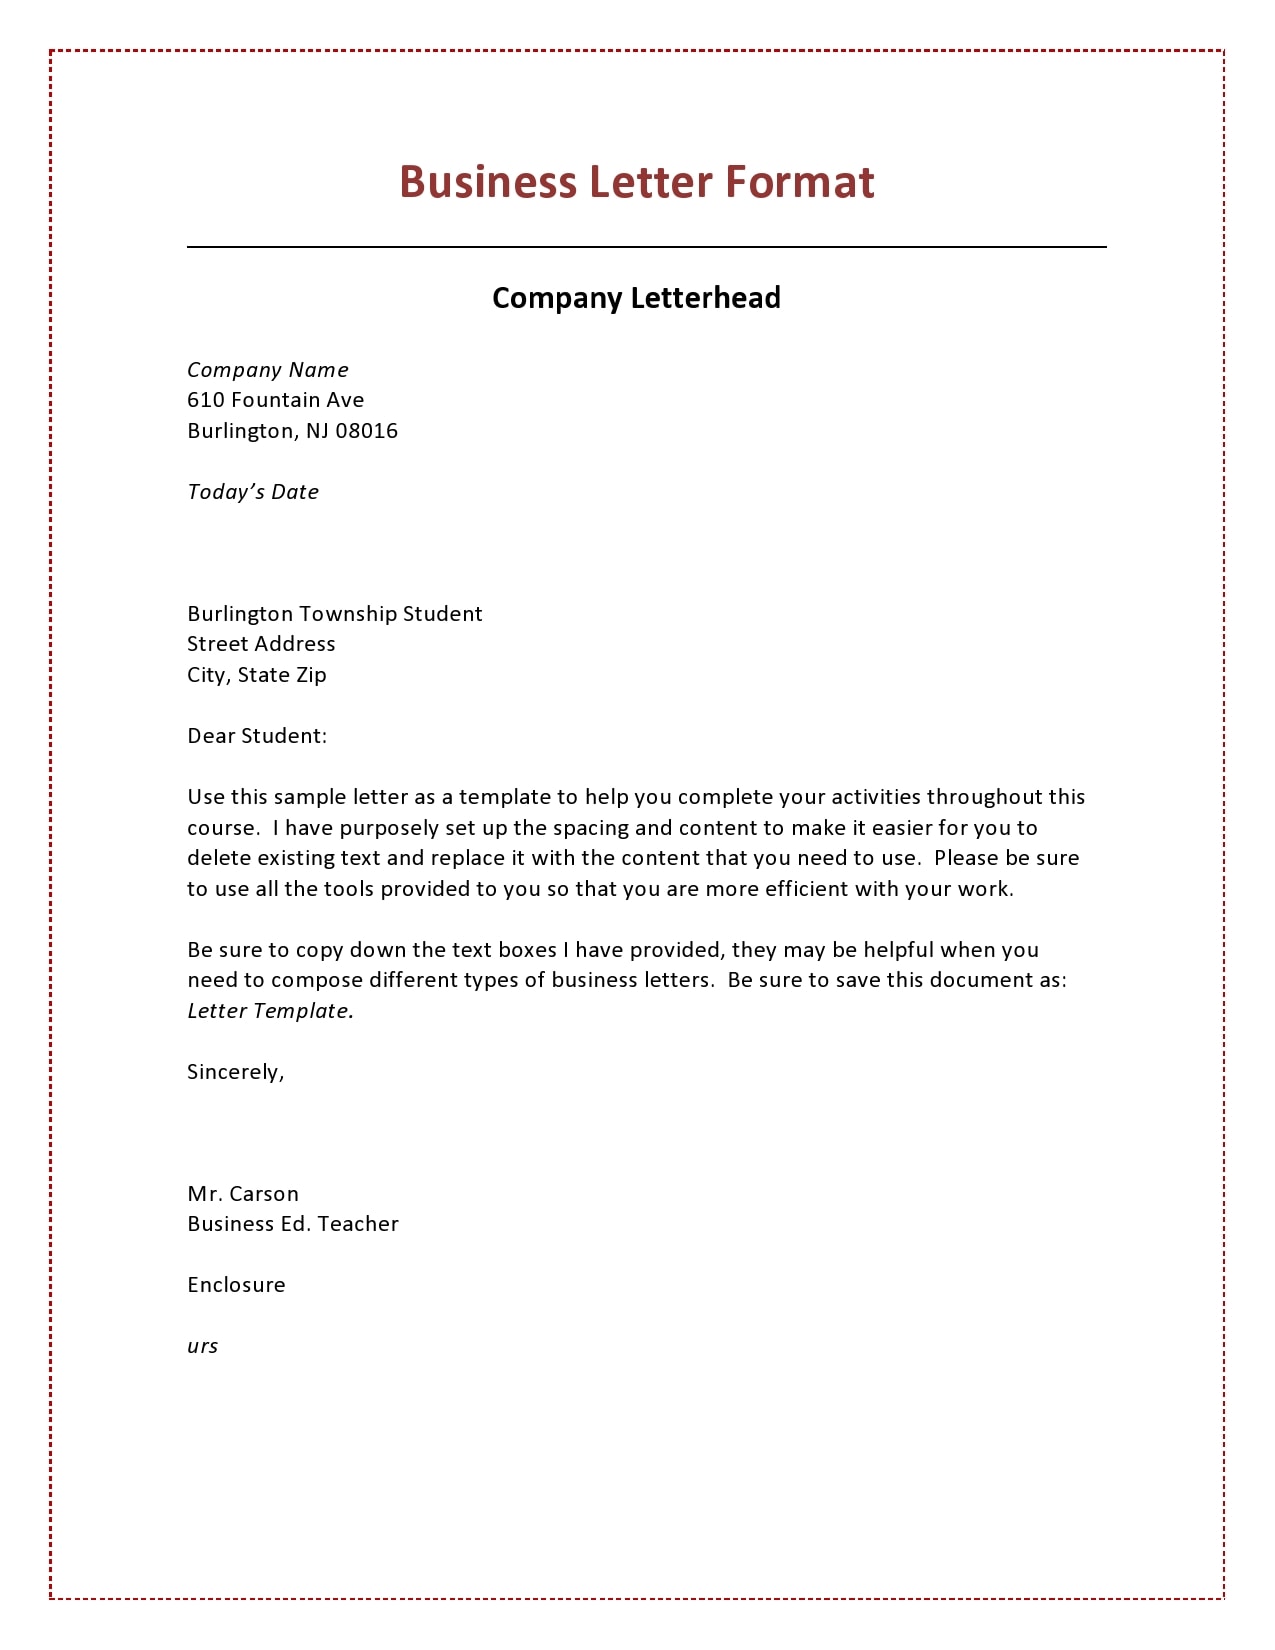 24 Professional Business Letter Templates [Word] Within Microsoft Word Business Letter Template